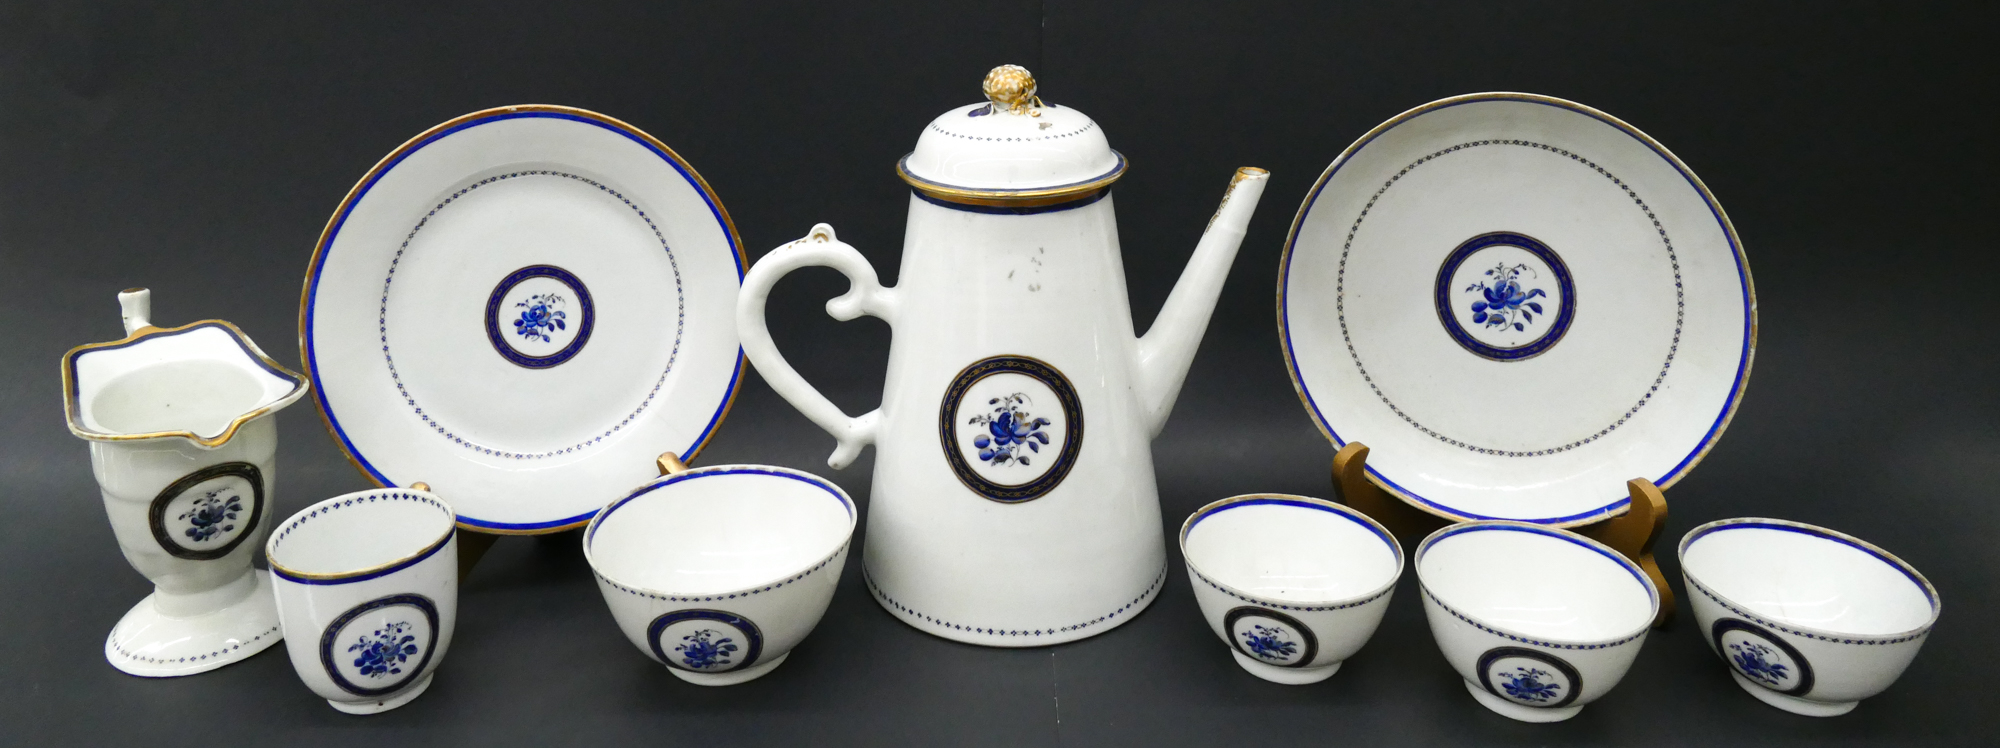 9pc 18th Century Chinese Export Porcelain.